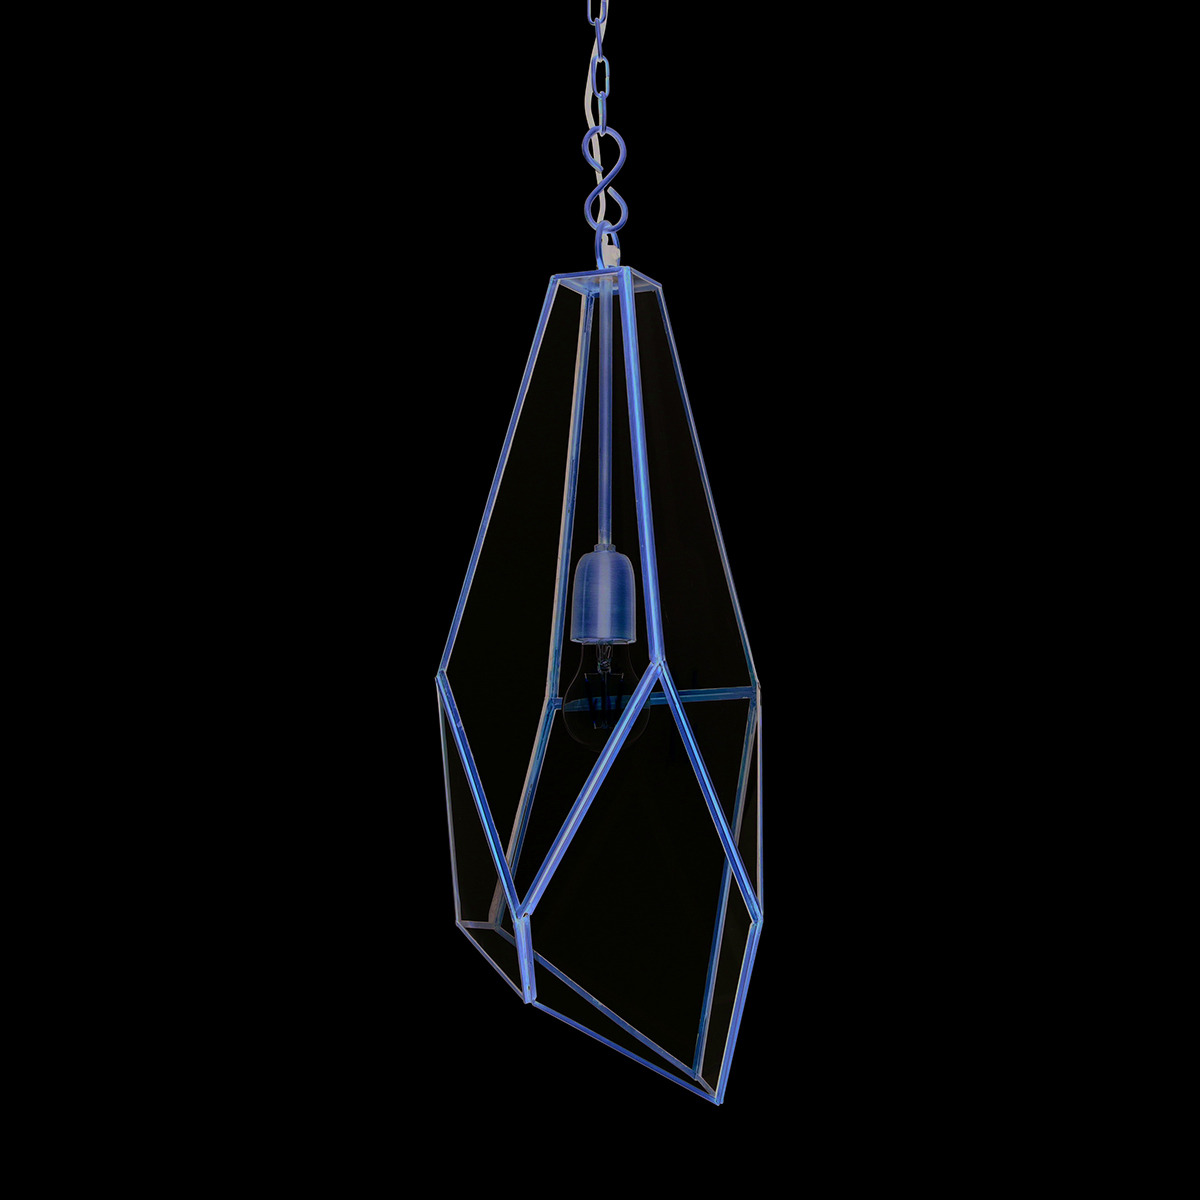 Aragon Clear Glass Pendant in Antique Brass